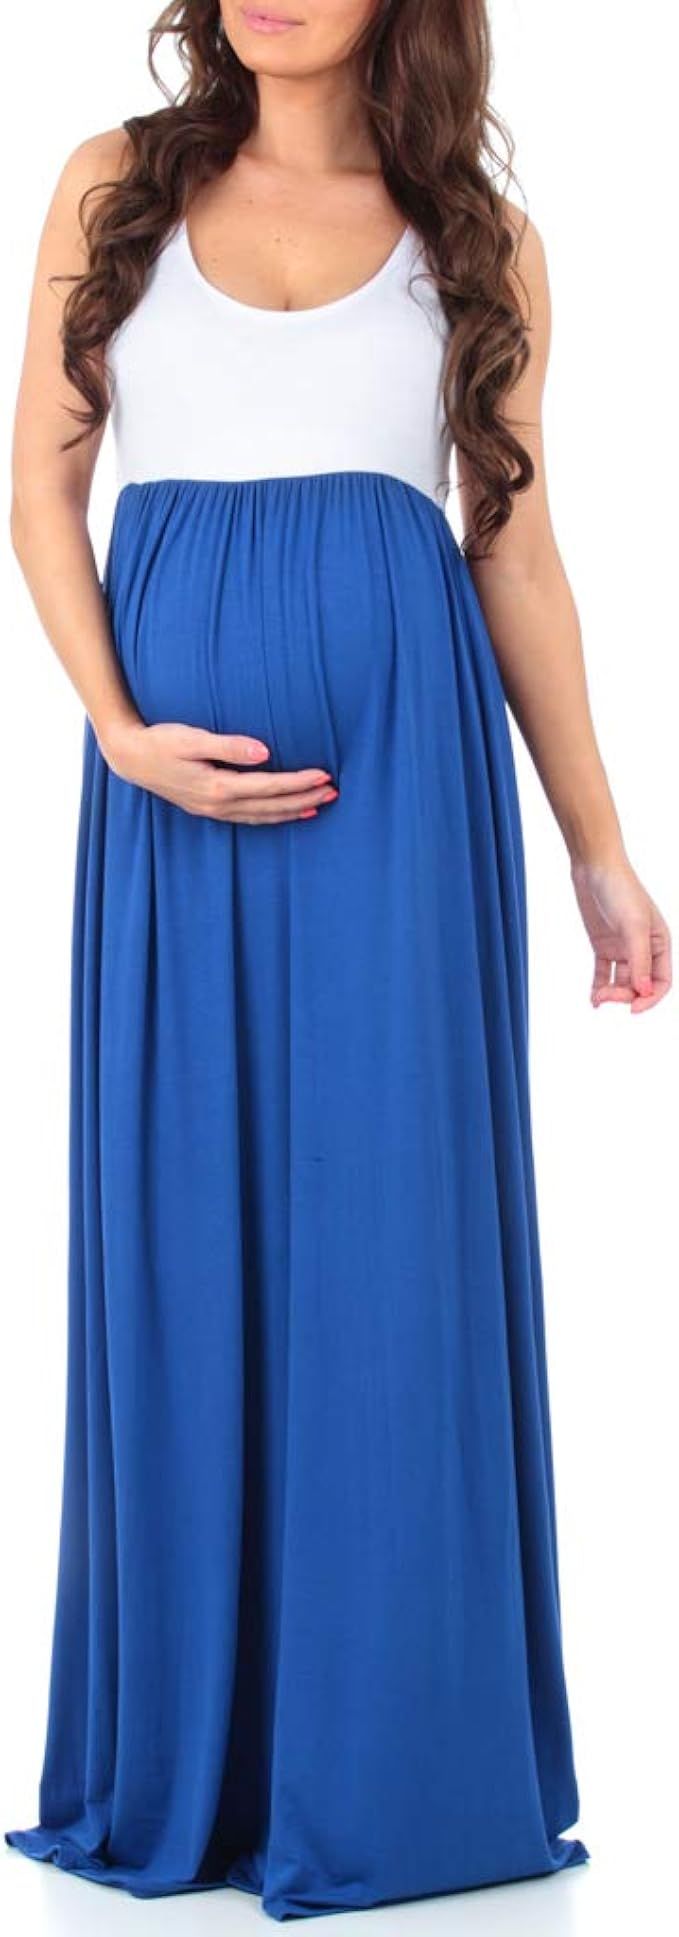 Sleeveless Ruched Color Block Maxi Maternity Dress for Baby Shower or Casual Wear | Amazon (US)